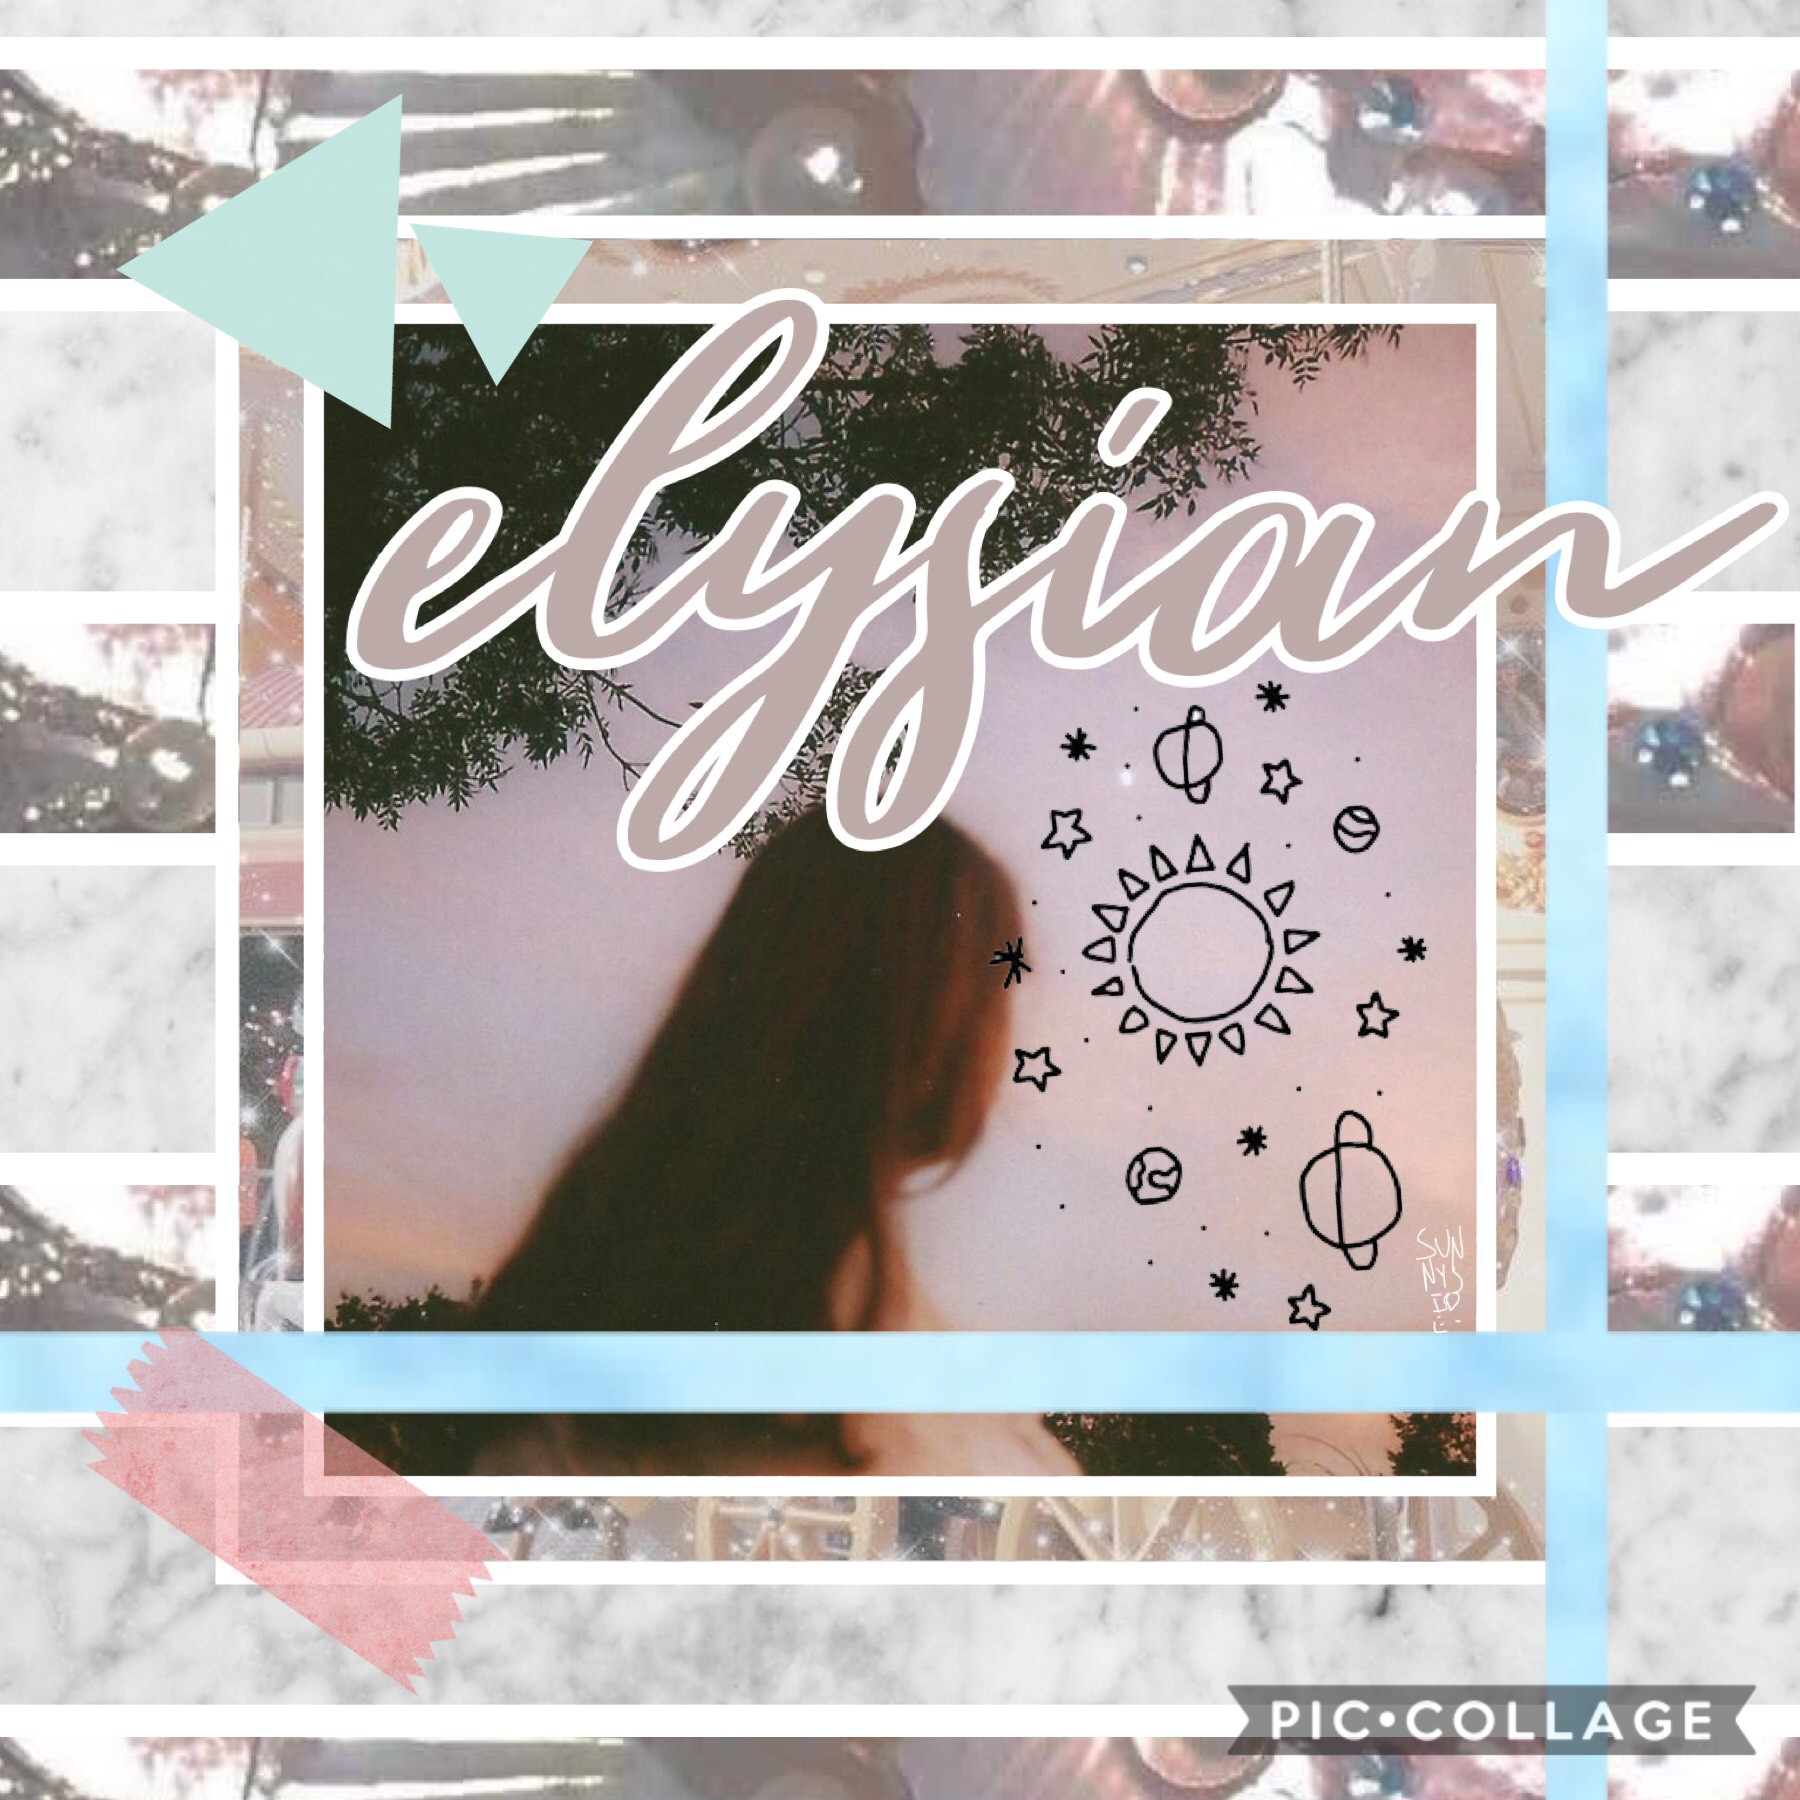 elysian - beautiful or creative [tap]

💫 🧸 inspired by @_BornToSlay_ 🧸💫
🌊🎀 hope you had a great week! 🎀🌊